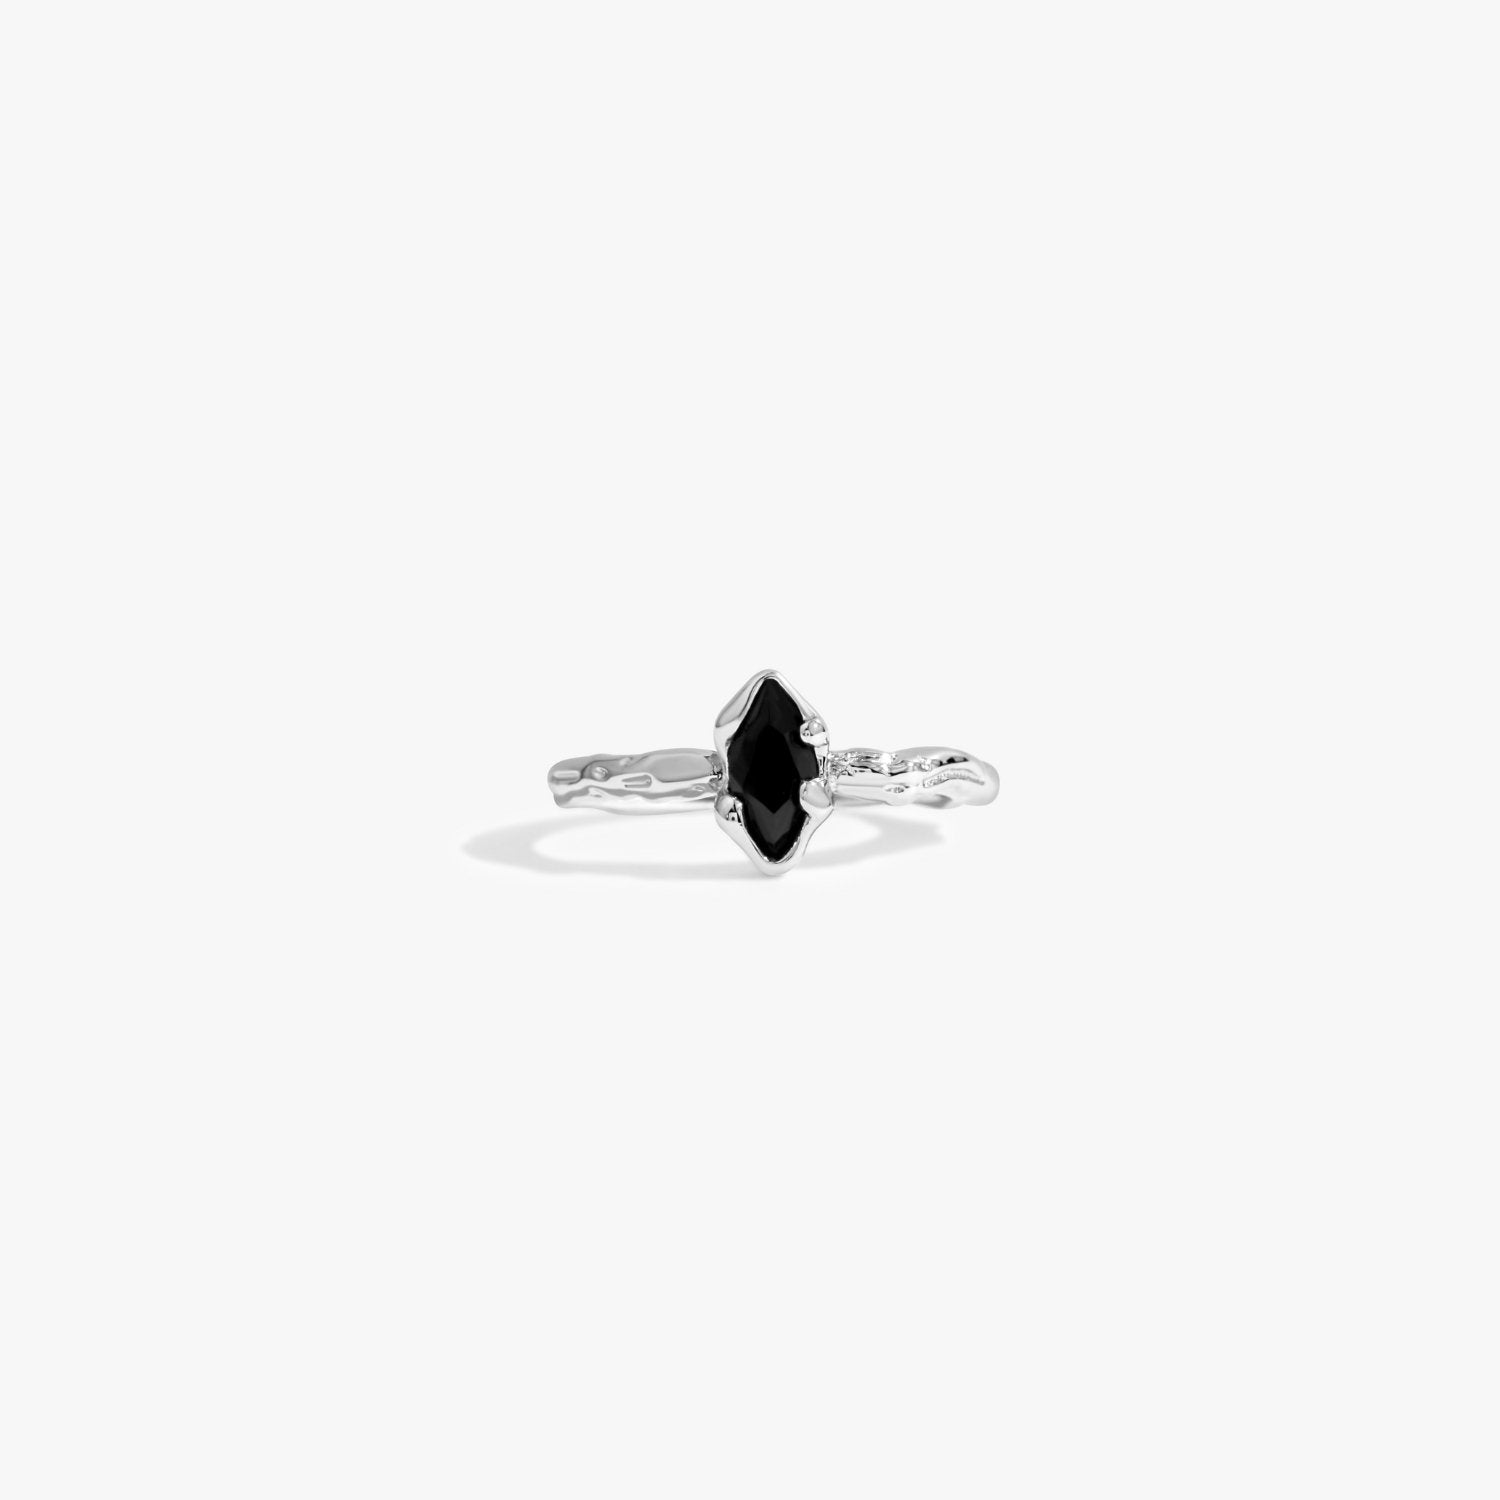 Thin Texture Black Gem Adjustable Sterling Silver Ring - Flaire & Co.